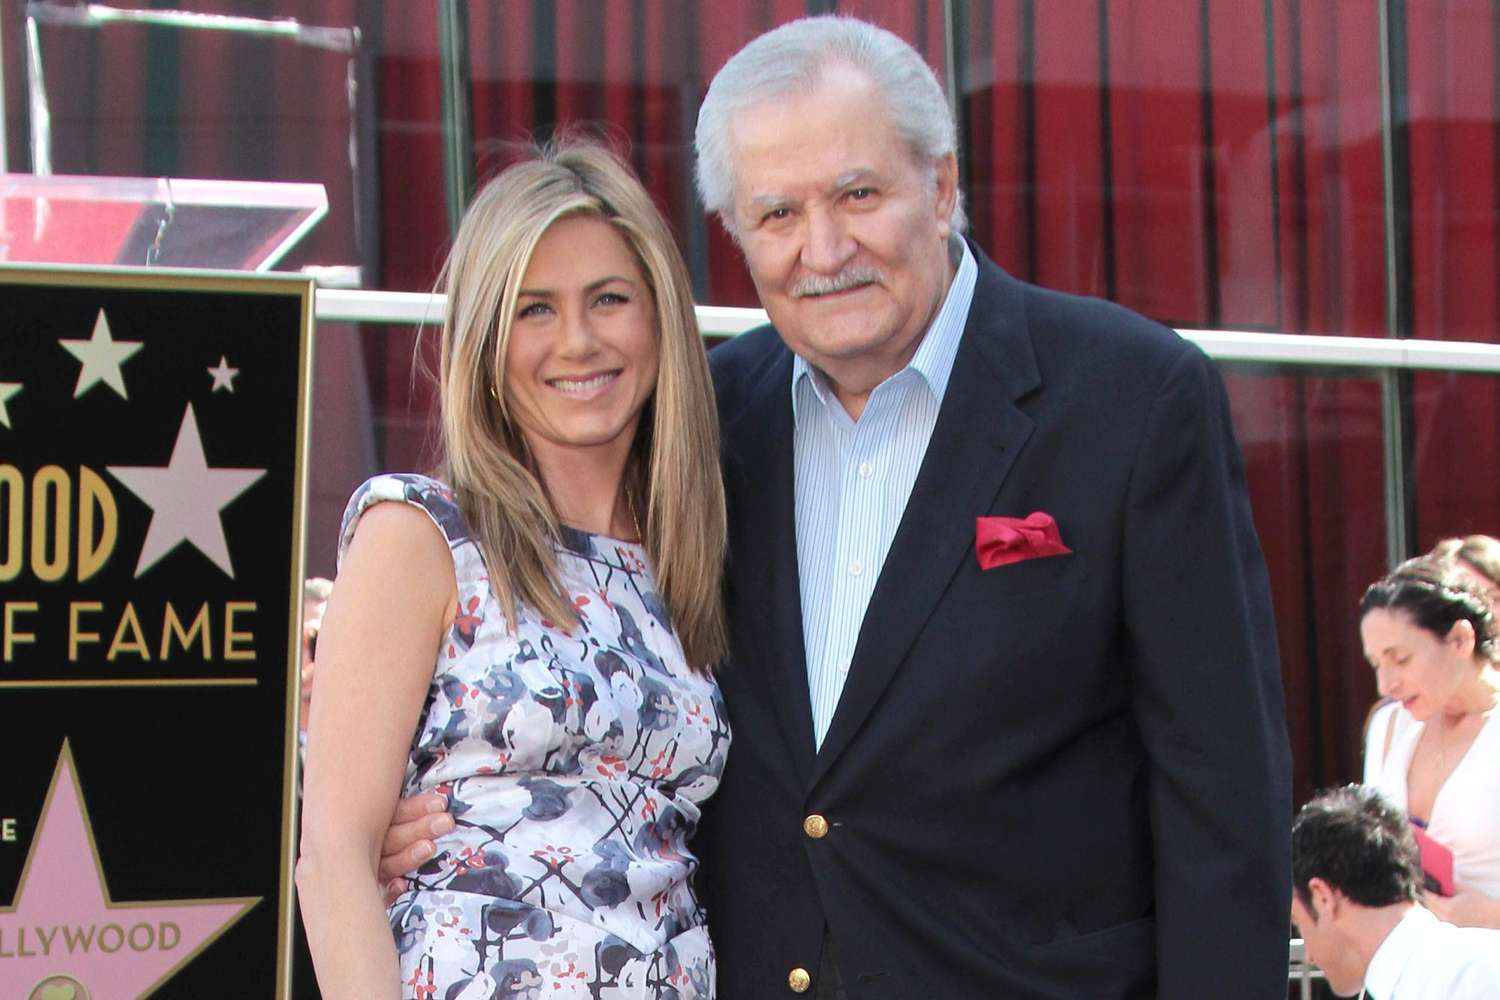 Mandatory Credit: Photo by Jim Smeal/BEI/Shutterstock (1626491bl) Jennifer Aniston and John Aniston Jennifer Aniston honored with Star on The Hollywood Walk Of Fame, Los Angeles, America - 22 Feb 2012